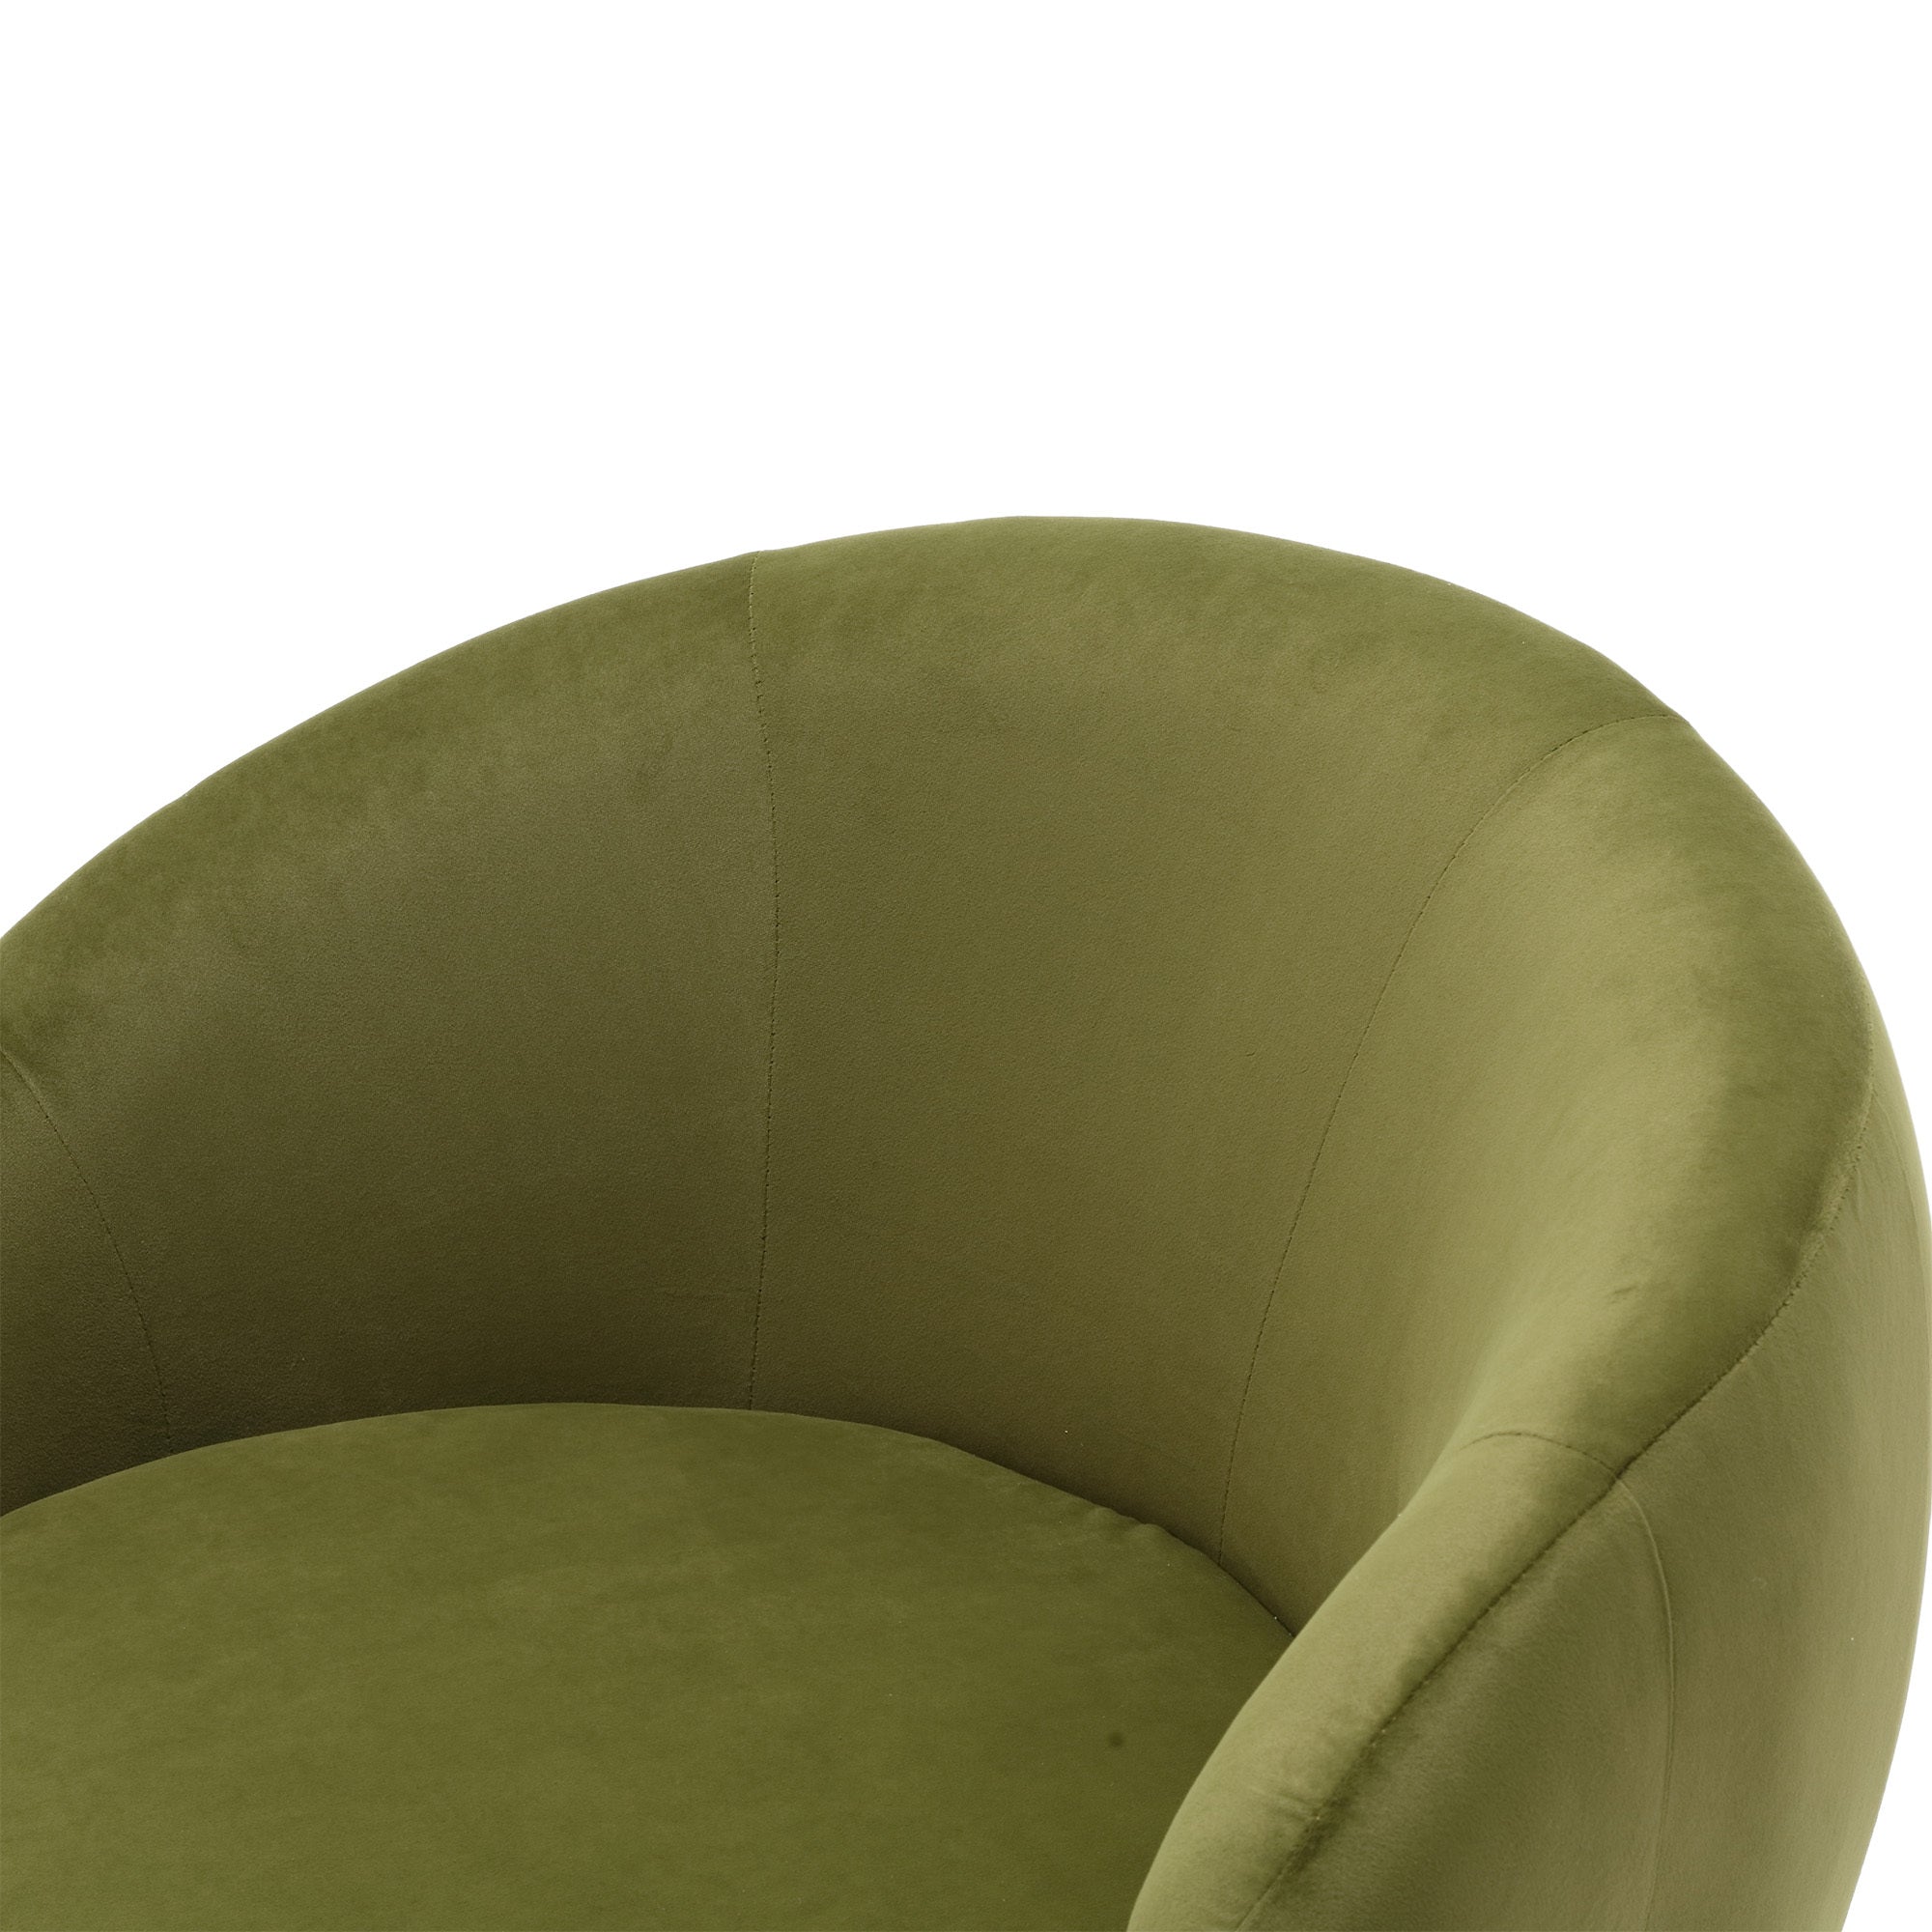 360 Degree Swivel Cuddle Barrel Accent Chairs, Round olive green-velvet